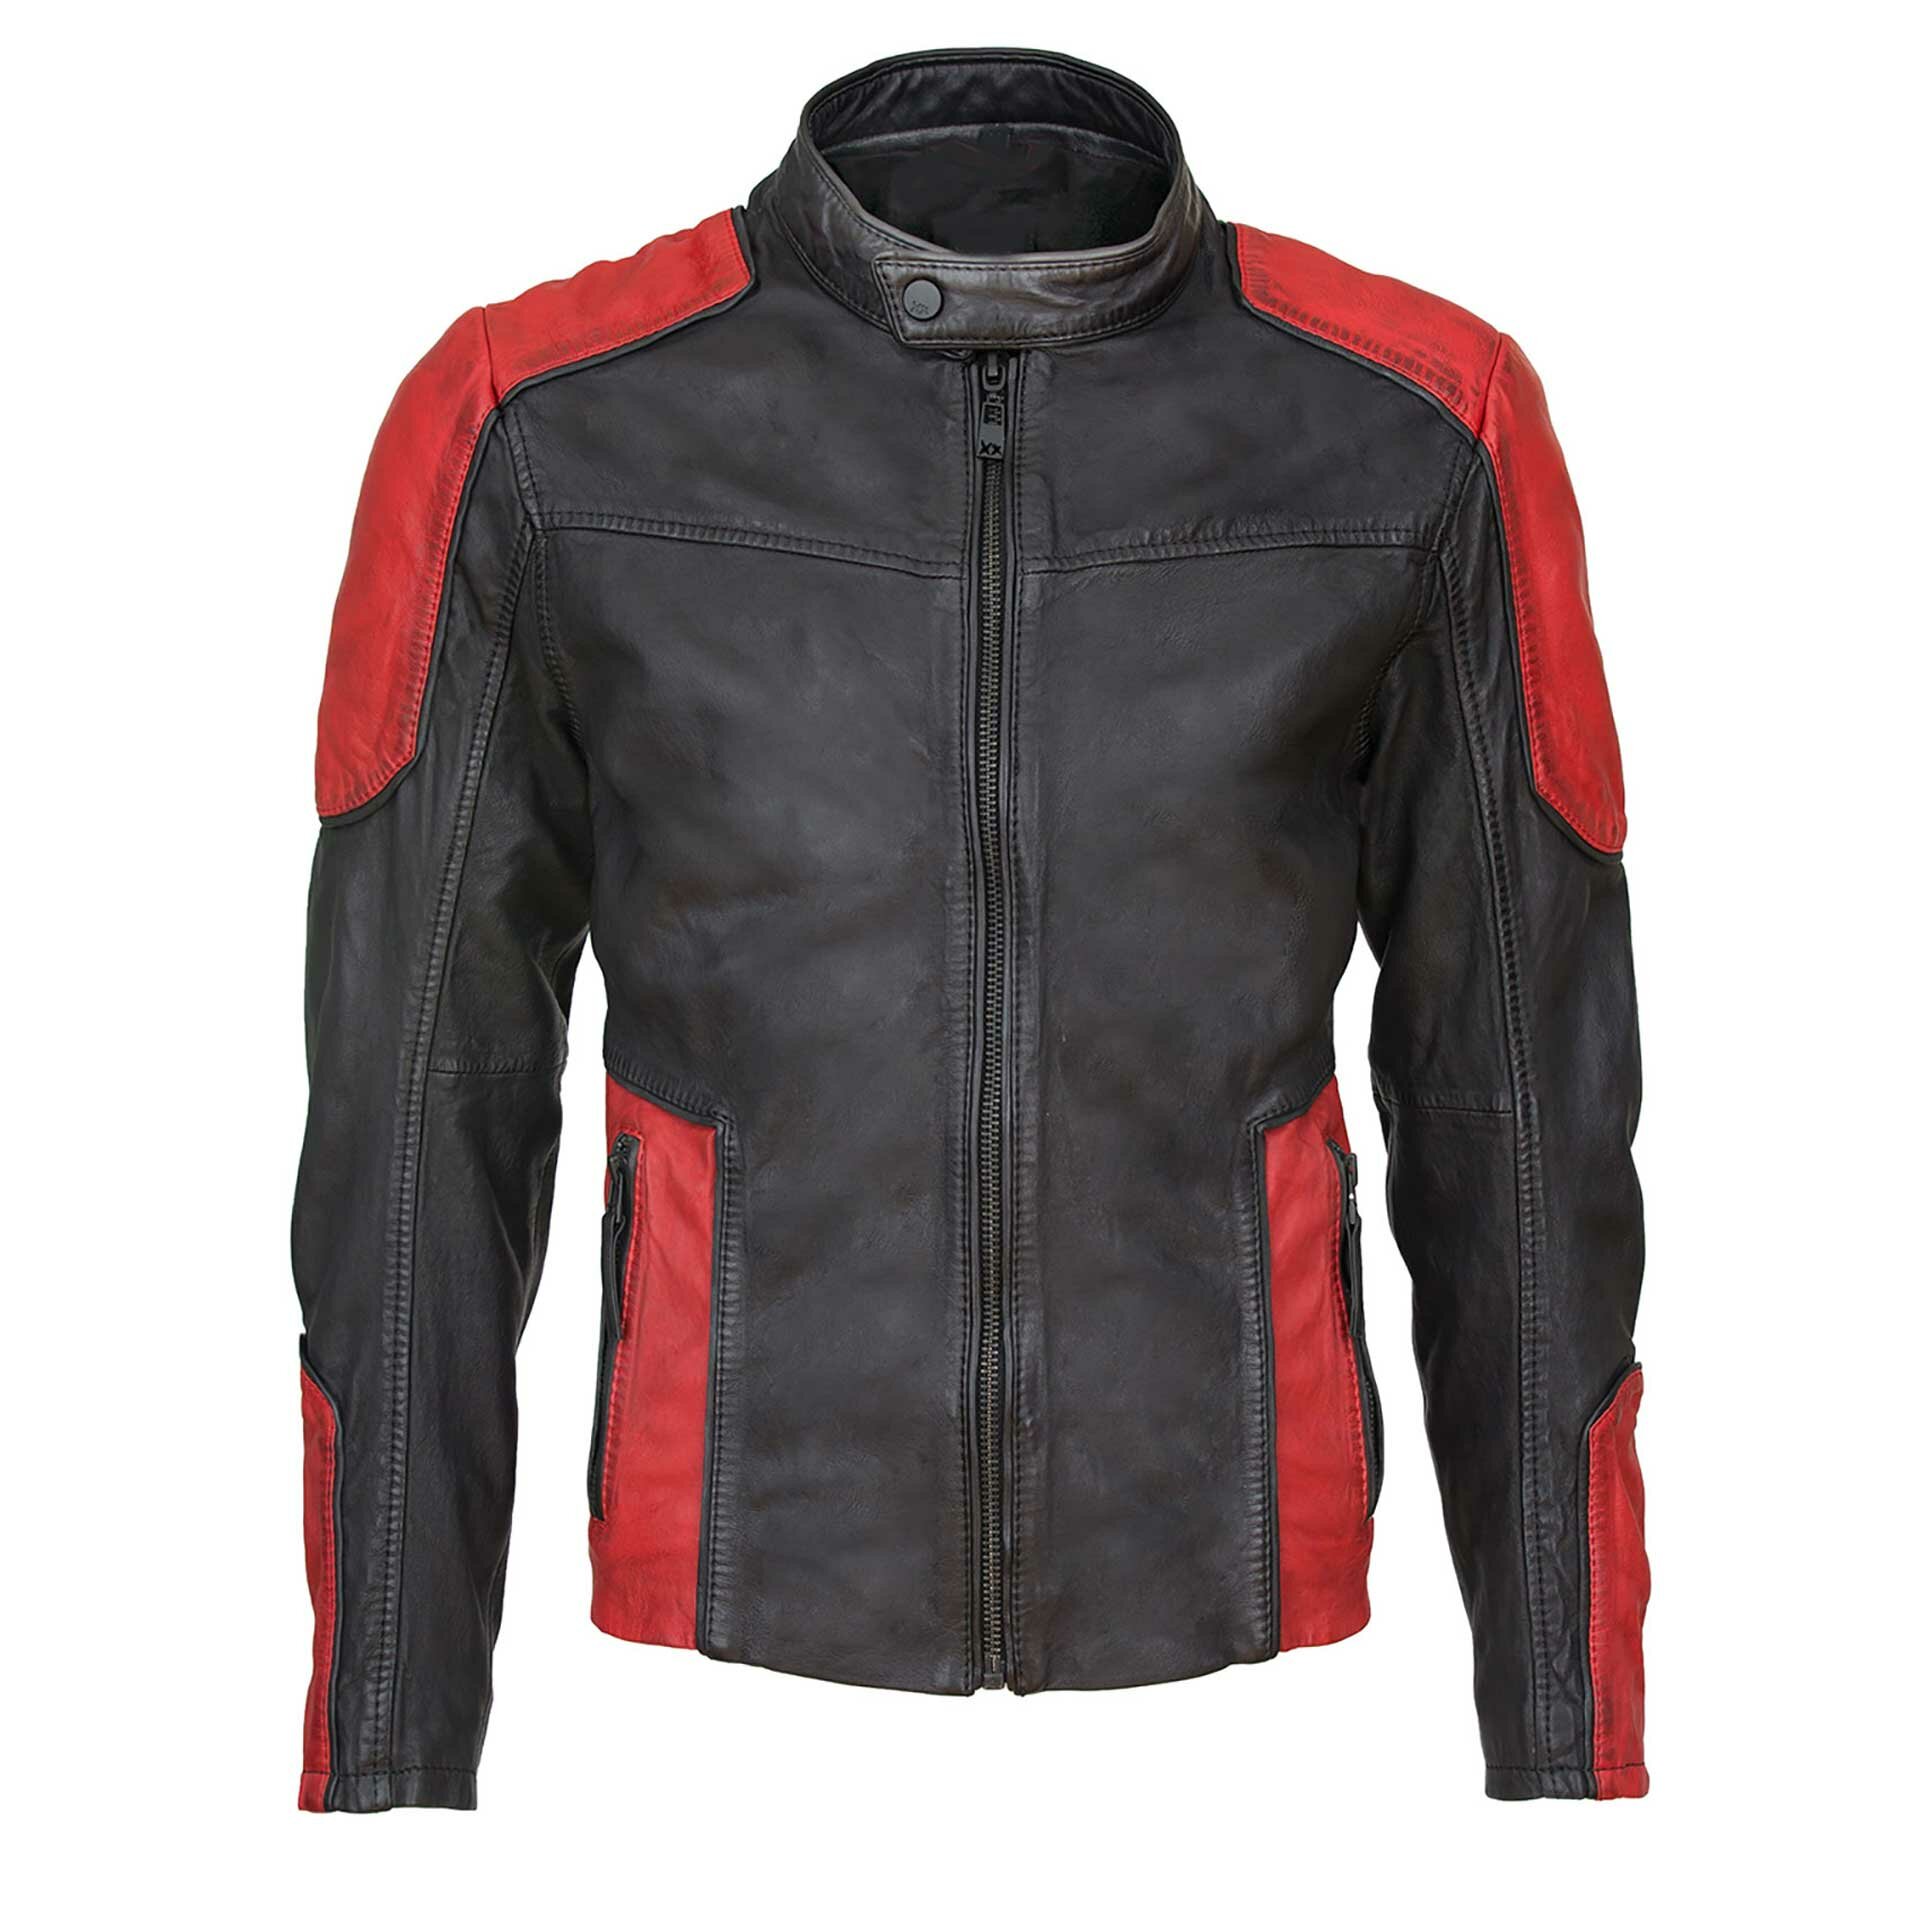 Will Smith Deadshot Jacket - Redirectted